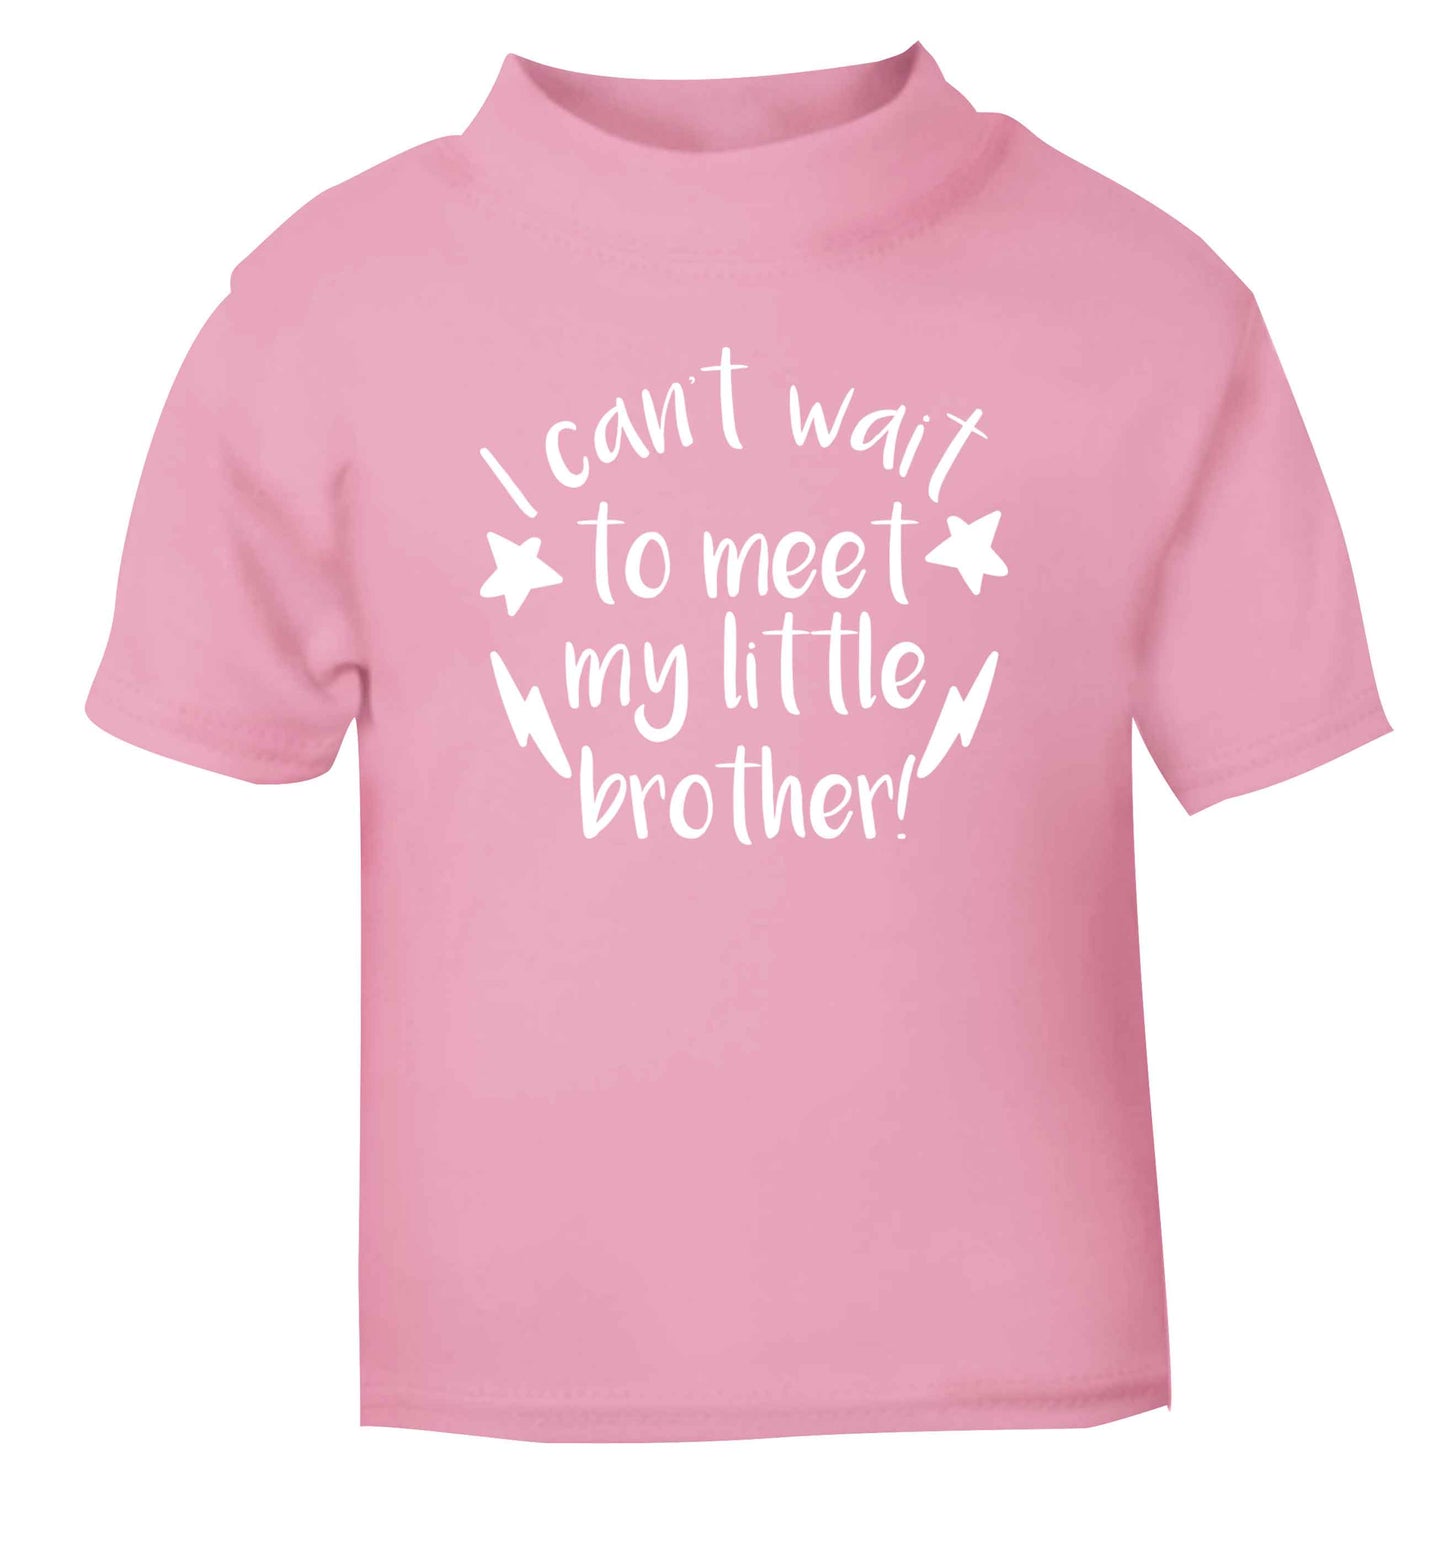 I can't wait to meet my sister! light pink Baby Toddler Tshirt 2 Years